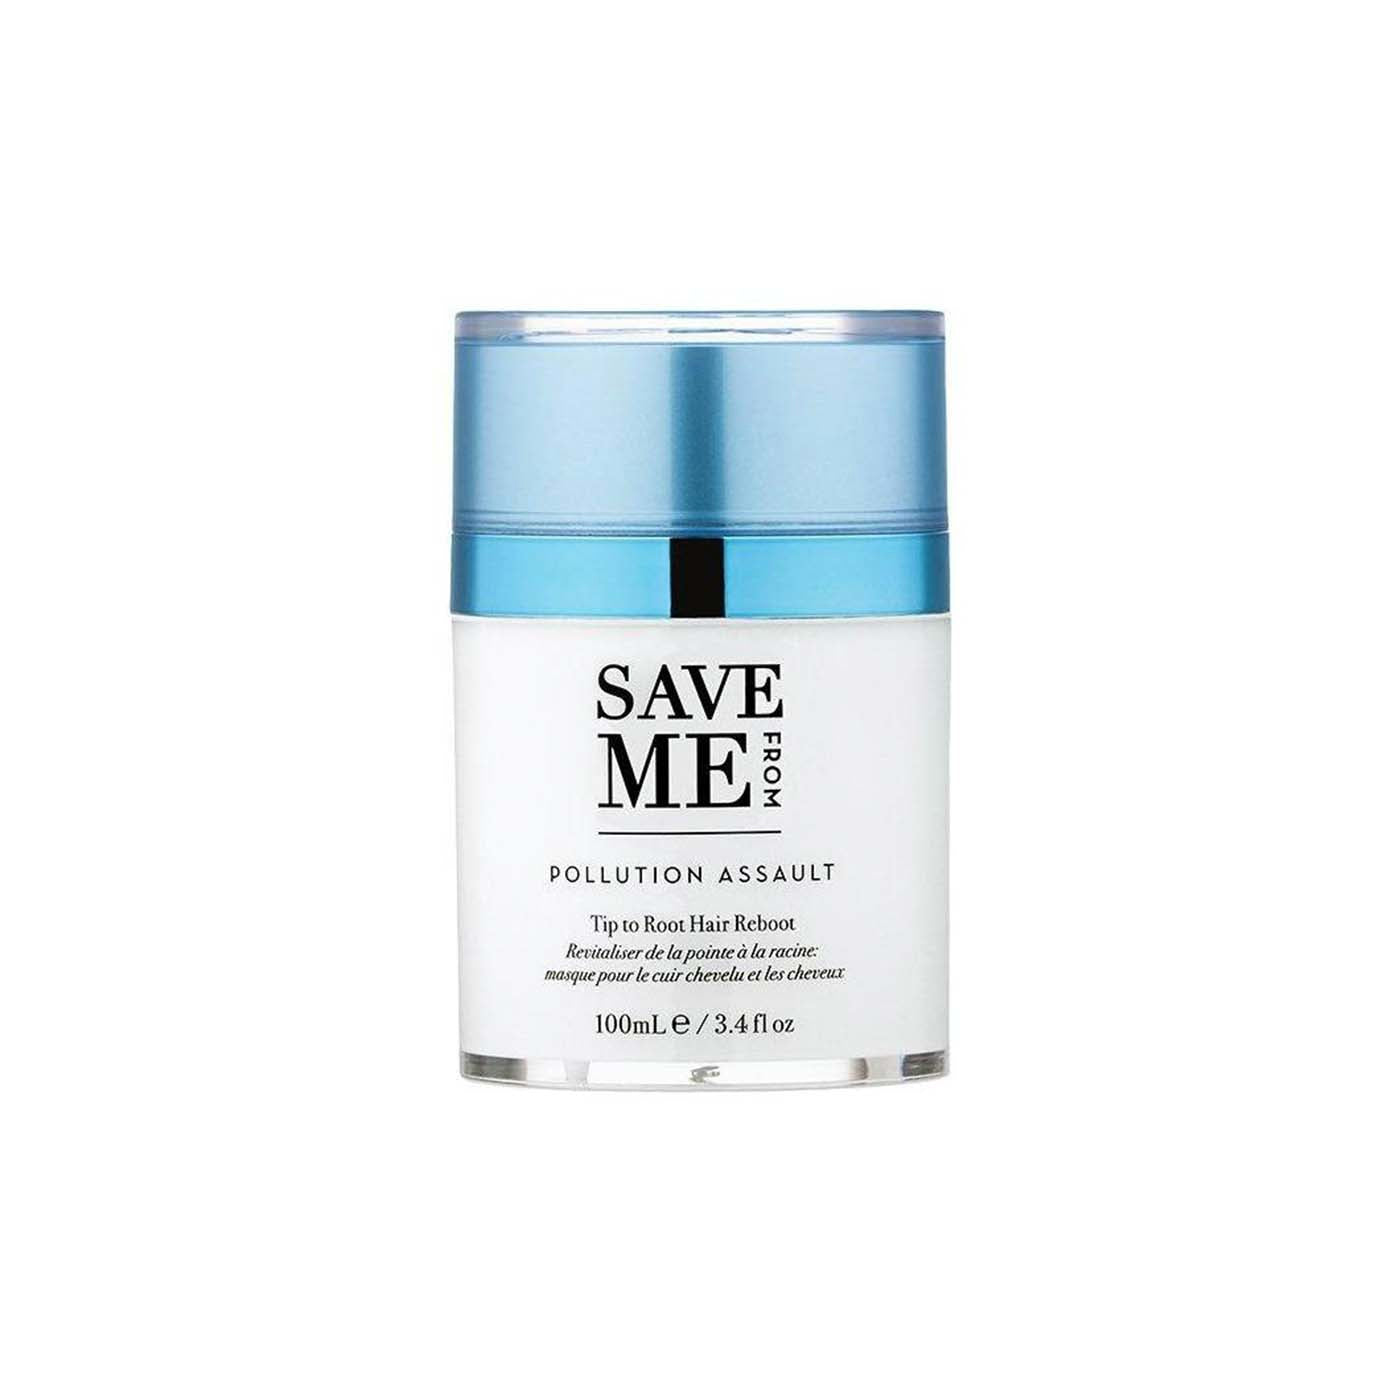 POLLUTION ASSAULT Tip to Root Hair Reboot 3.4 fl oz | Save Me From